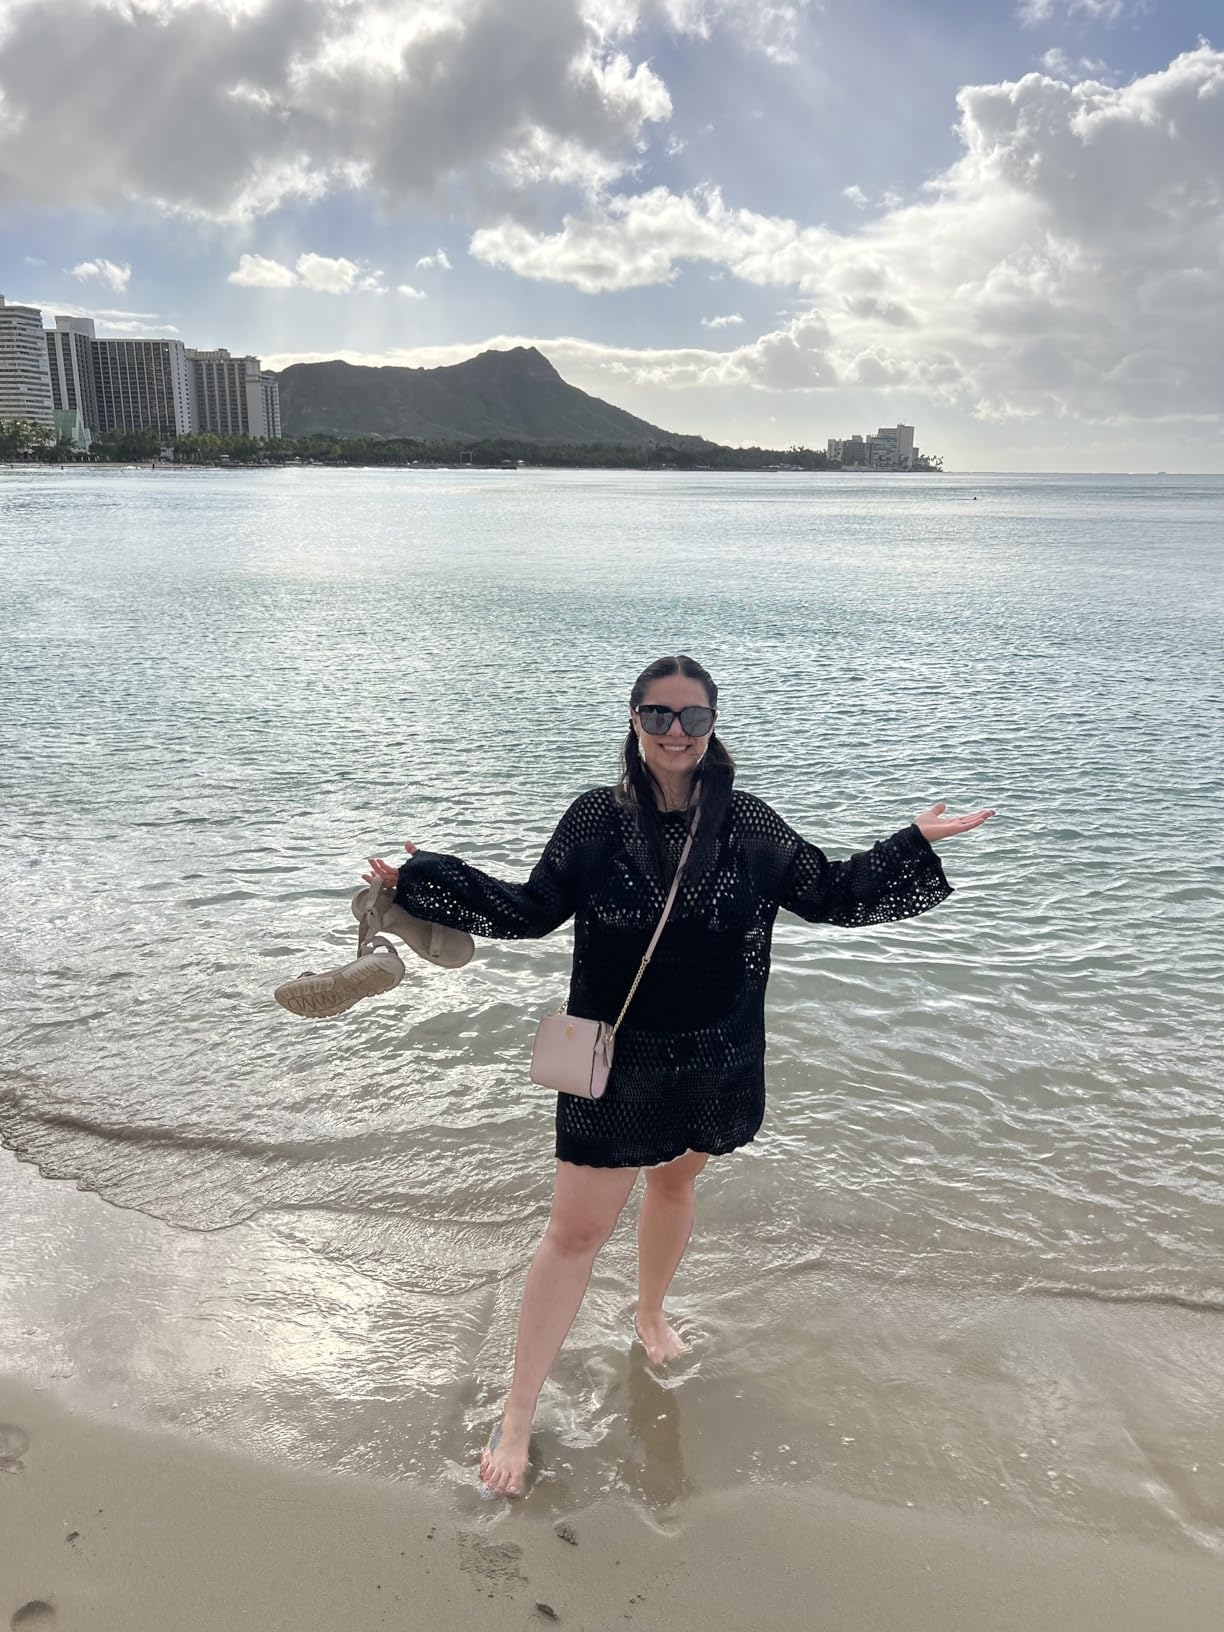 Reviewer on a beach holding sandals, wearing a black cover-up and sunglasses, smiling with Diamond Head and ocean in the background